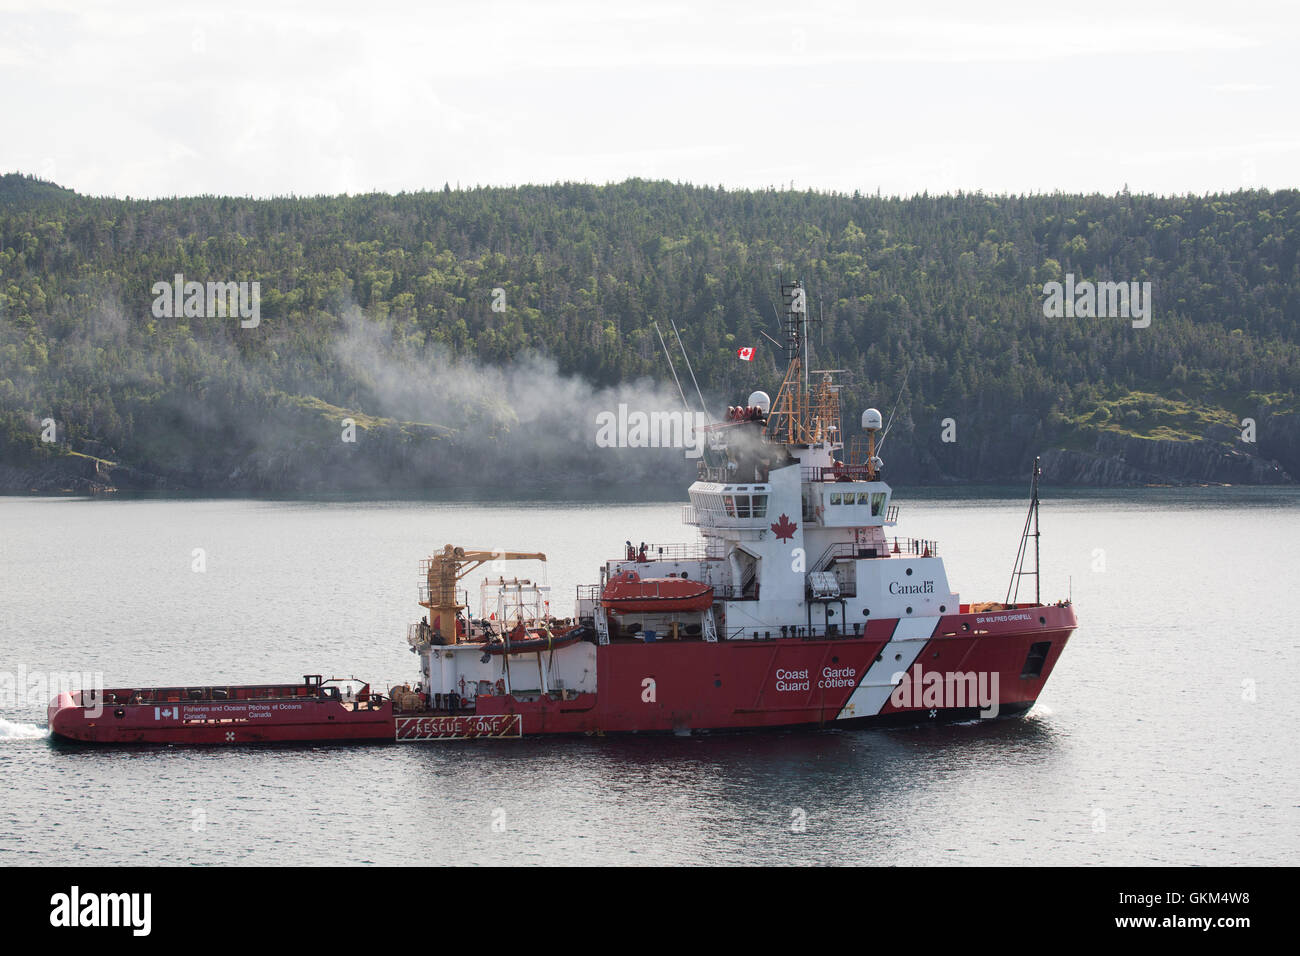 A Canadian Coast Guard ship off the coast of Newfoundland and Labrador, Canada. The ship has red and white livery. Stock Photo